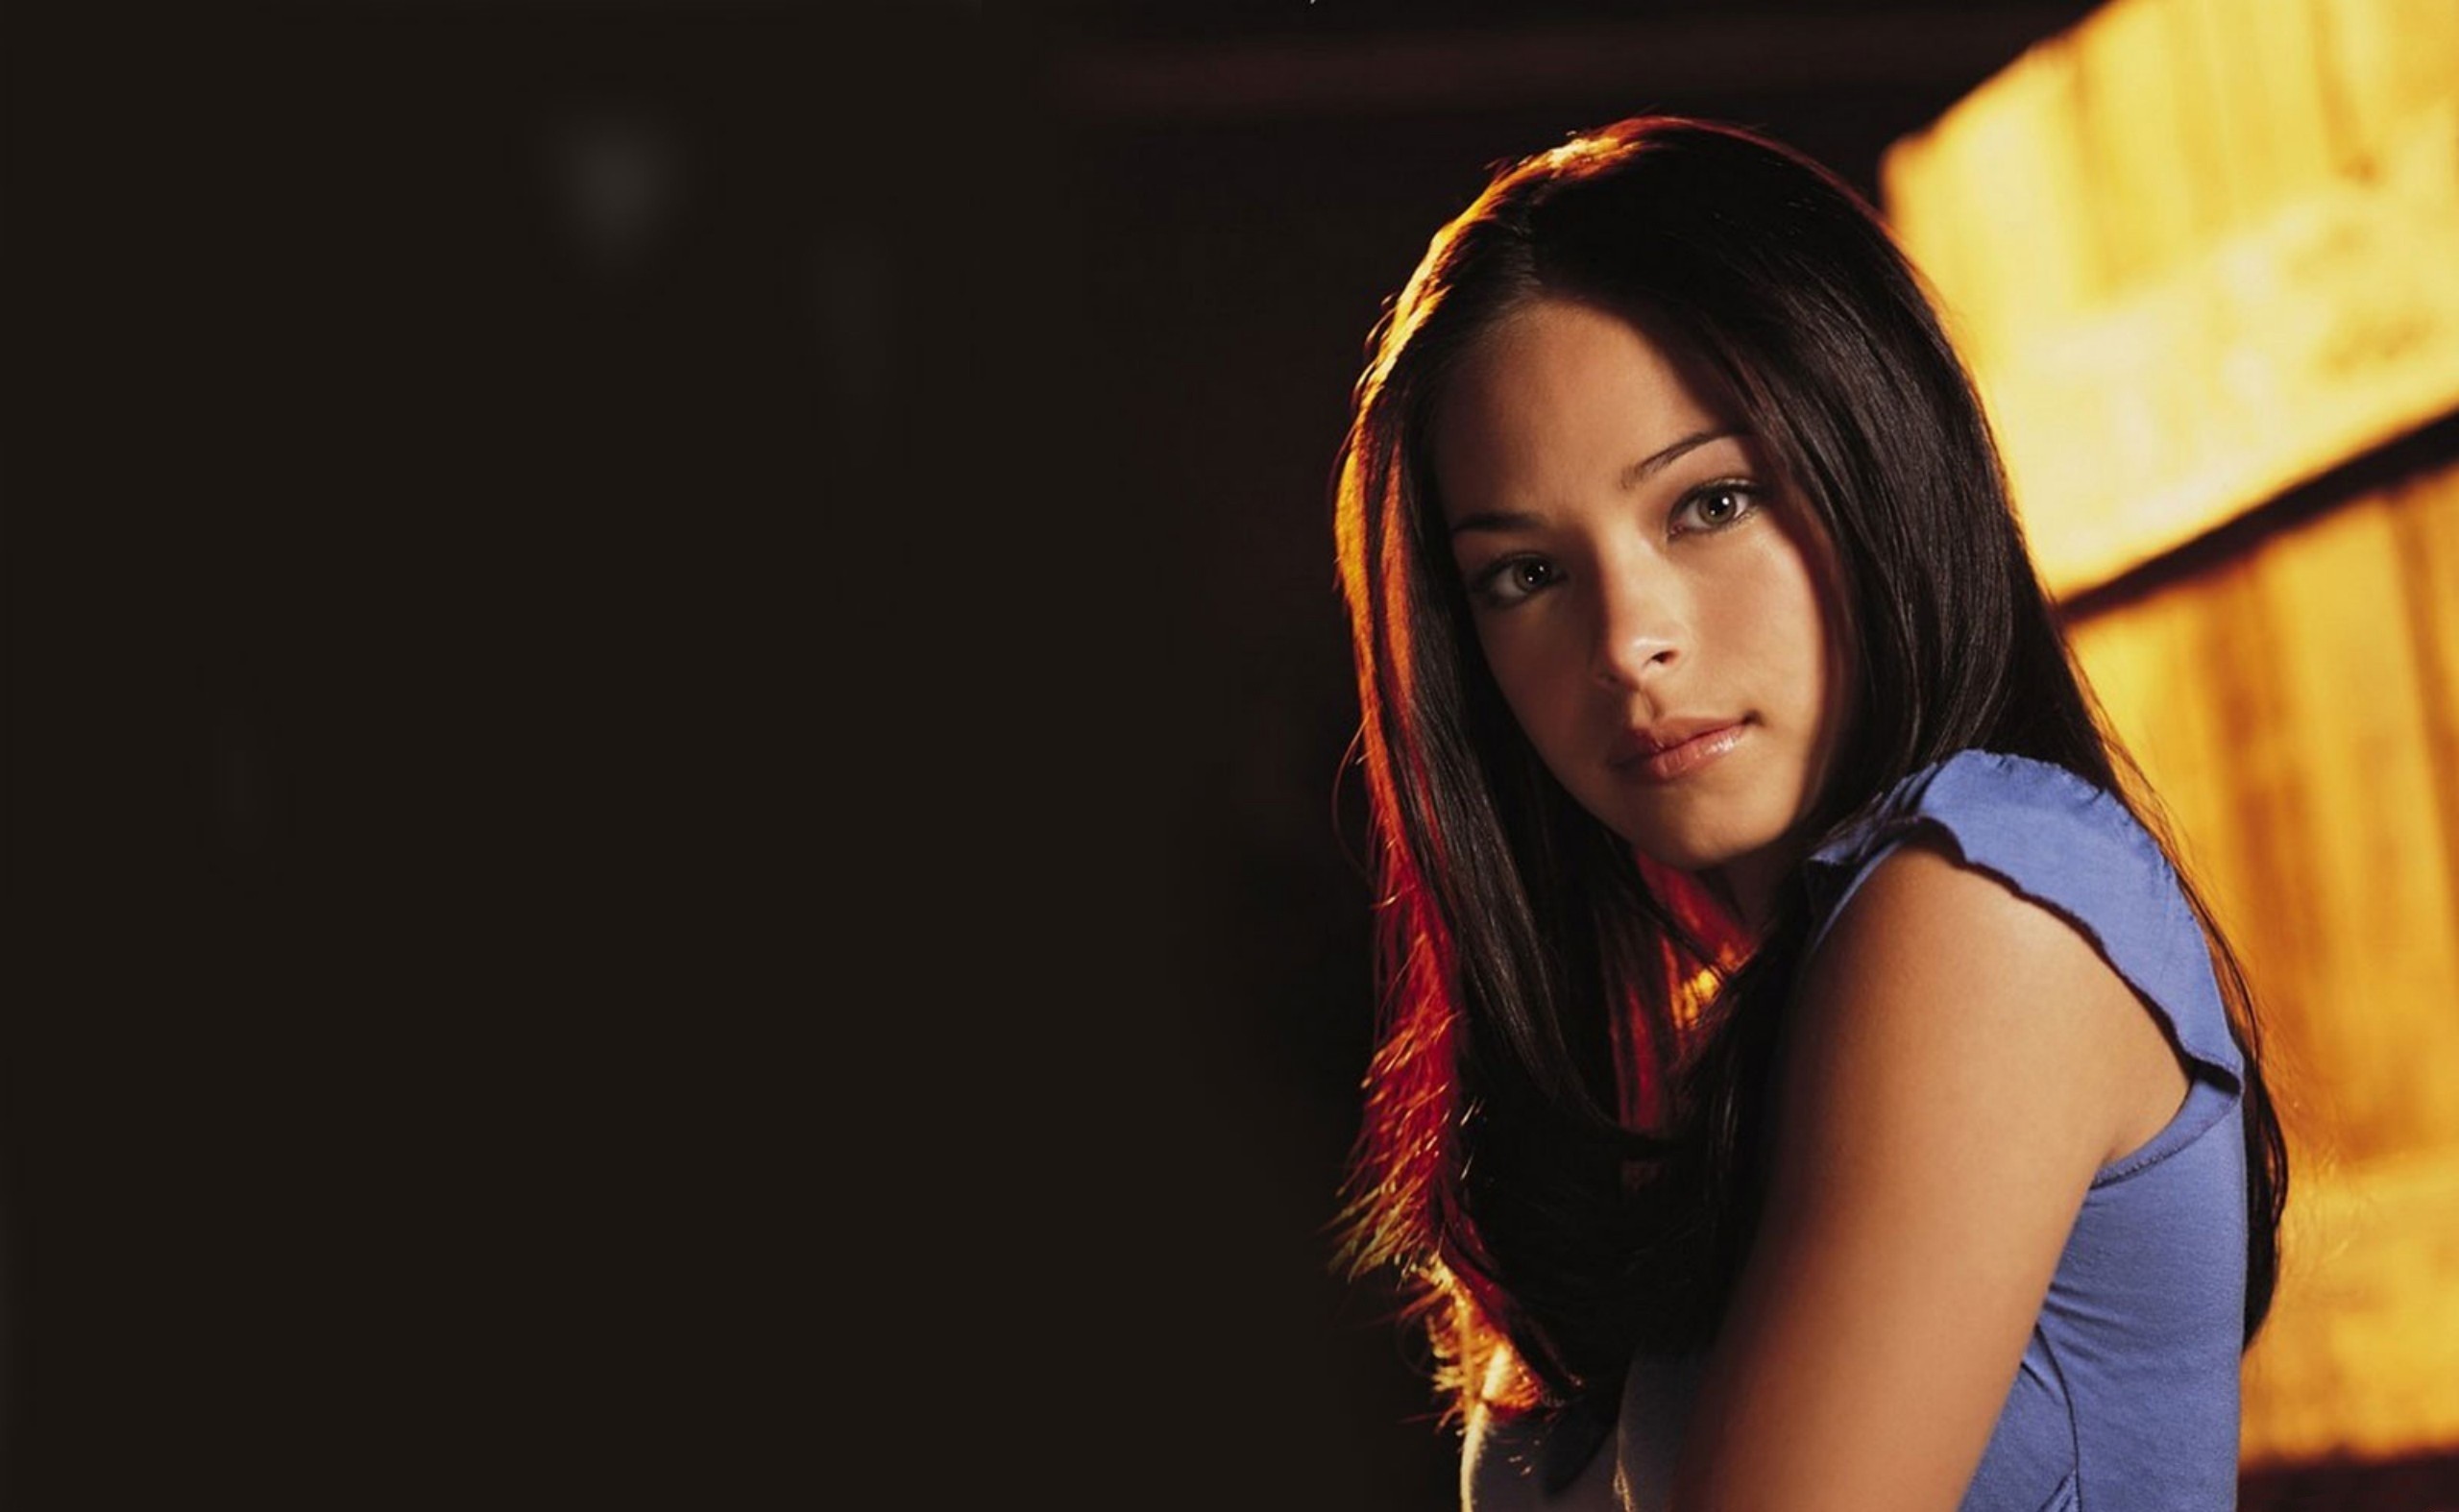 Kristin Kreuk 8x10 #KK01 No white or black borders What you see is what you get 11x14 Photo No Image is Cropped Clock 